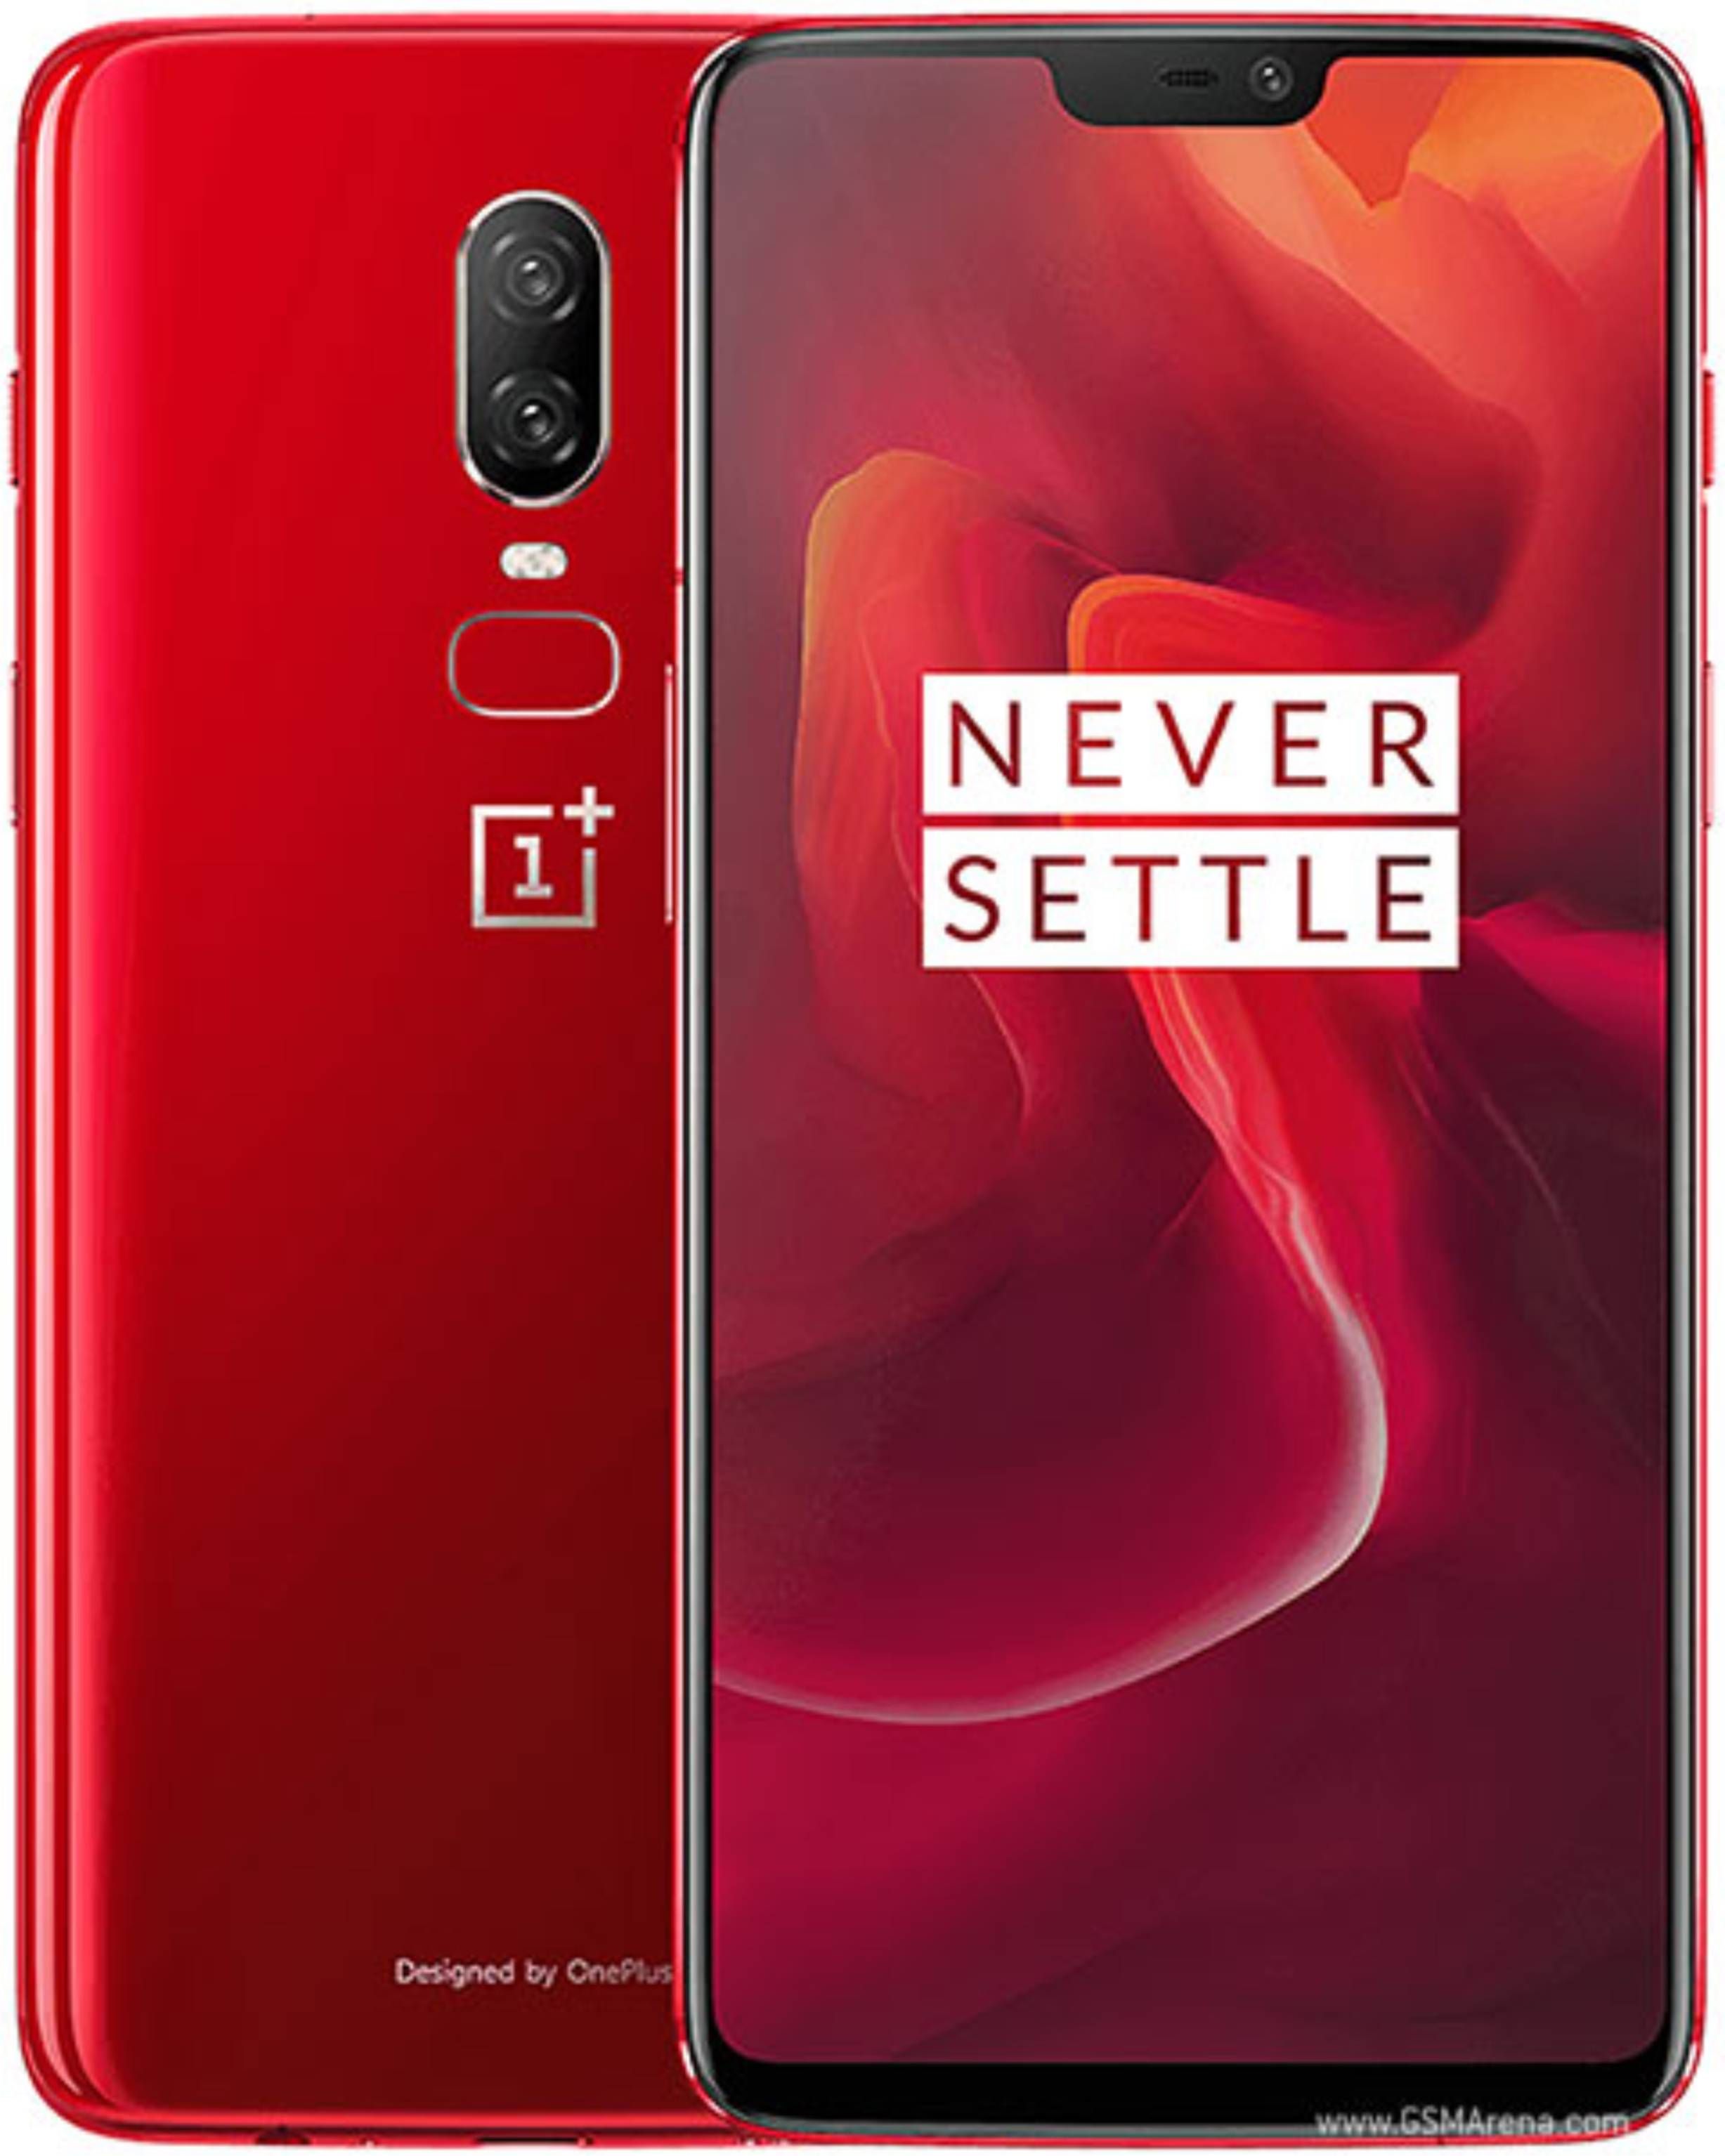 OnePlus 6 Specifications and Price in Kenya